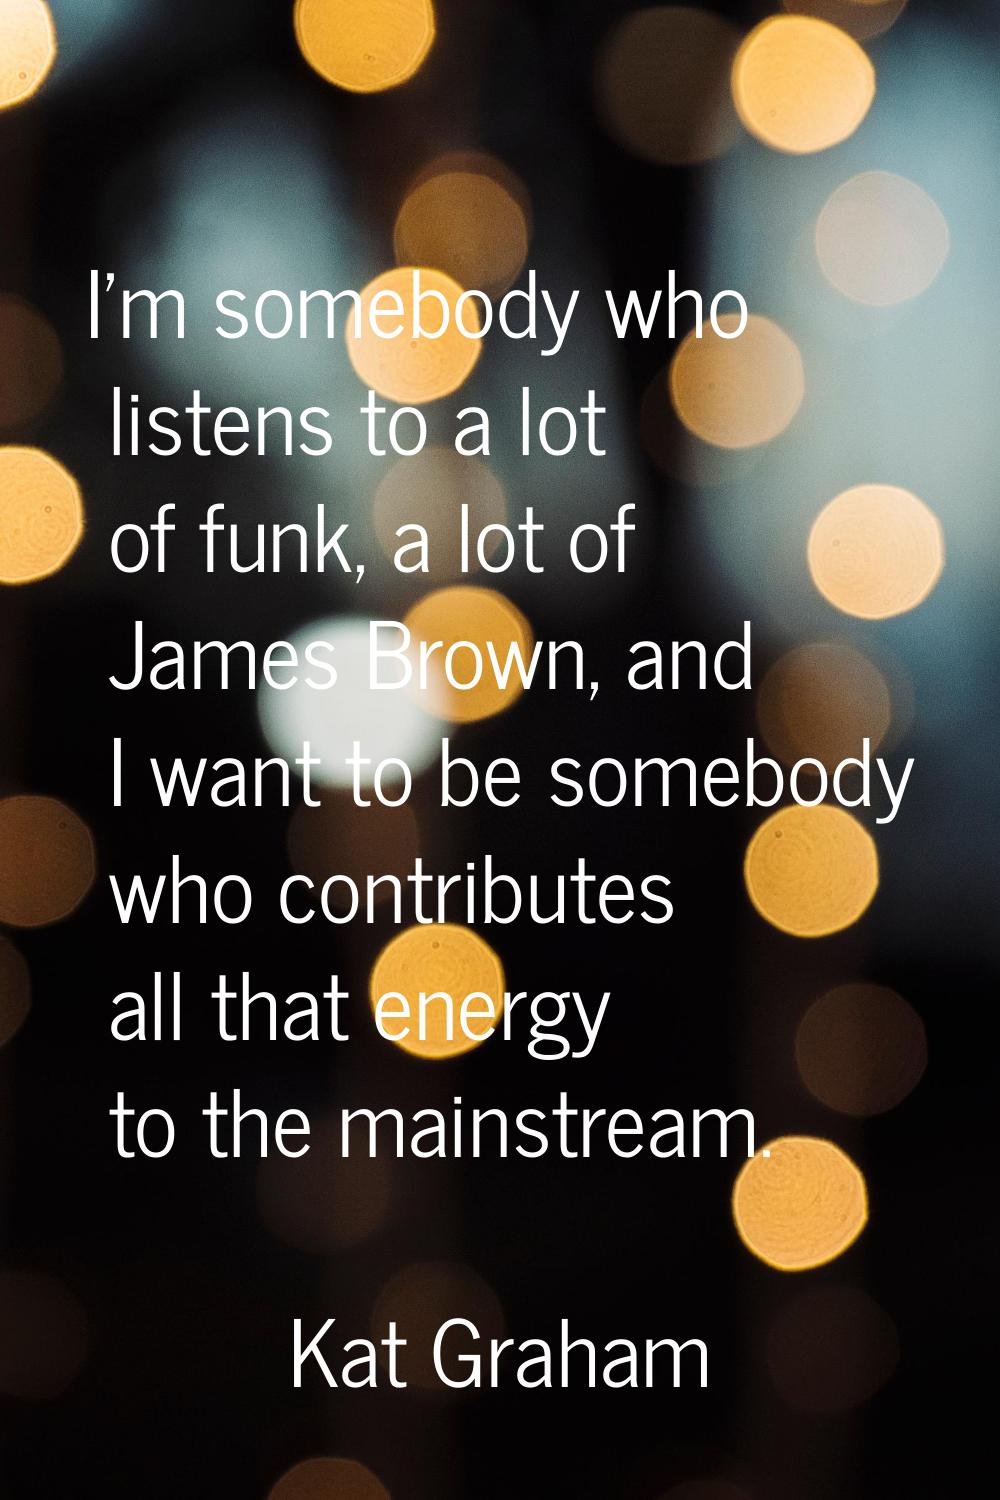 I'm somebody who listens to a lot of funk, a lot of James Brown, and I want to be somebody who cont